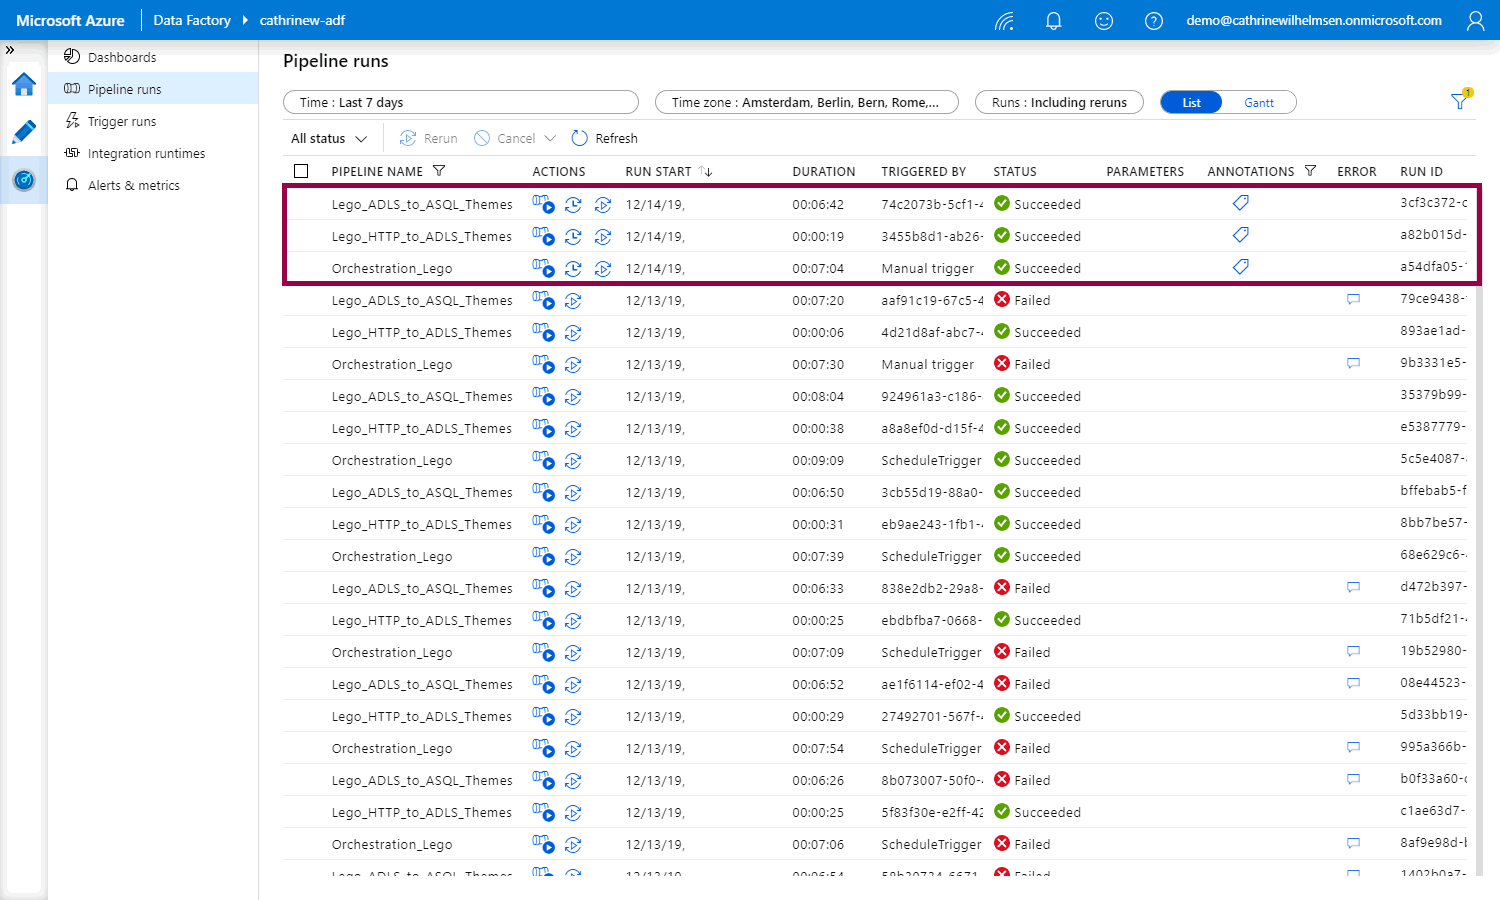 Screenshot of the pipeline runs monitoring view, highlighting the latest pipeline runs with annotations